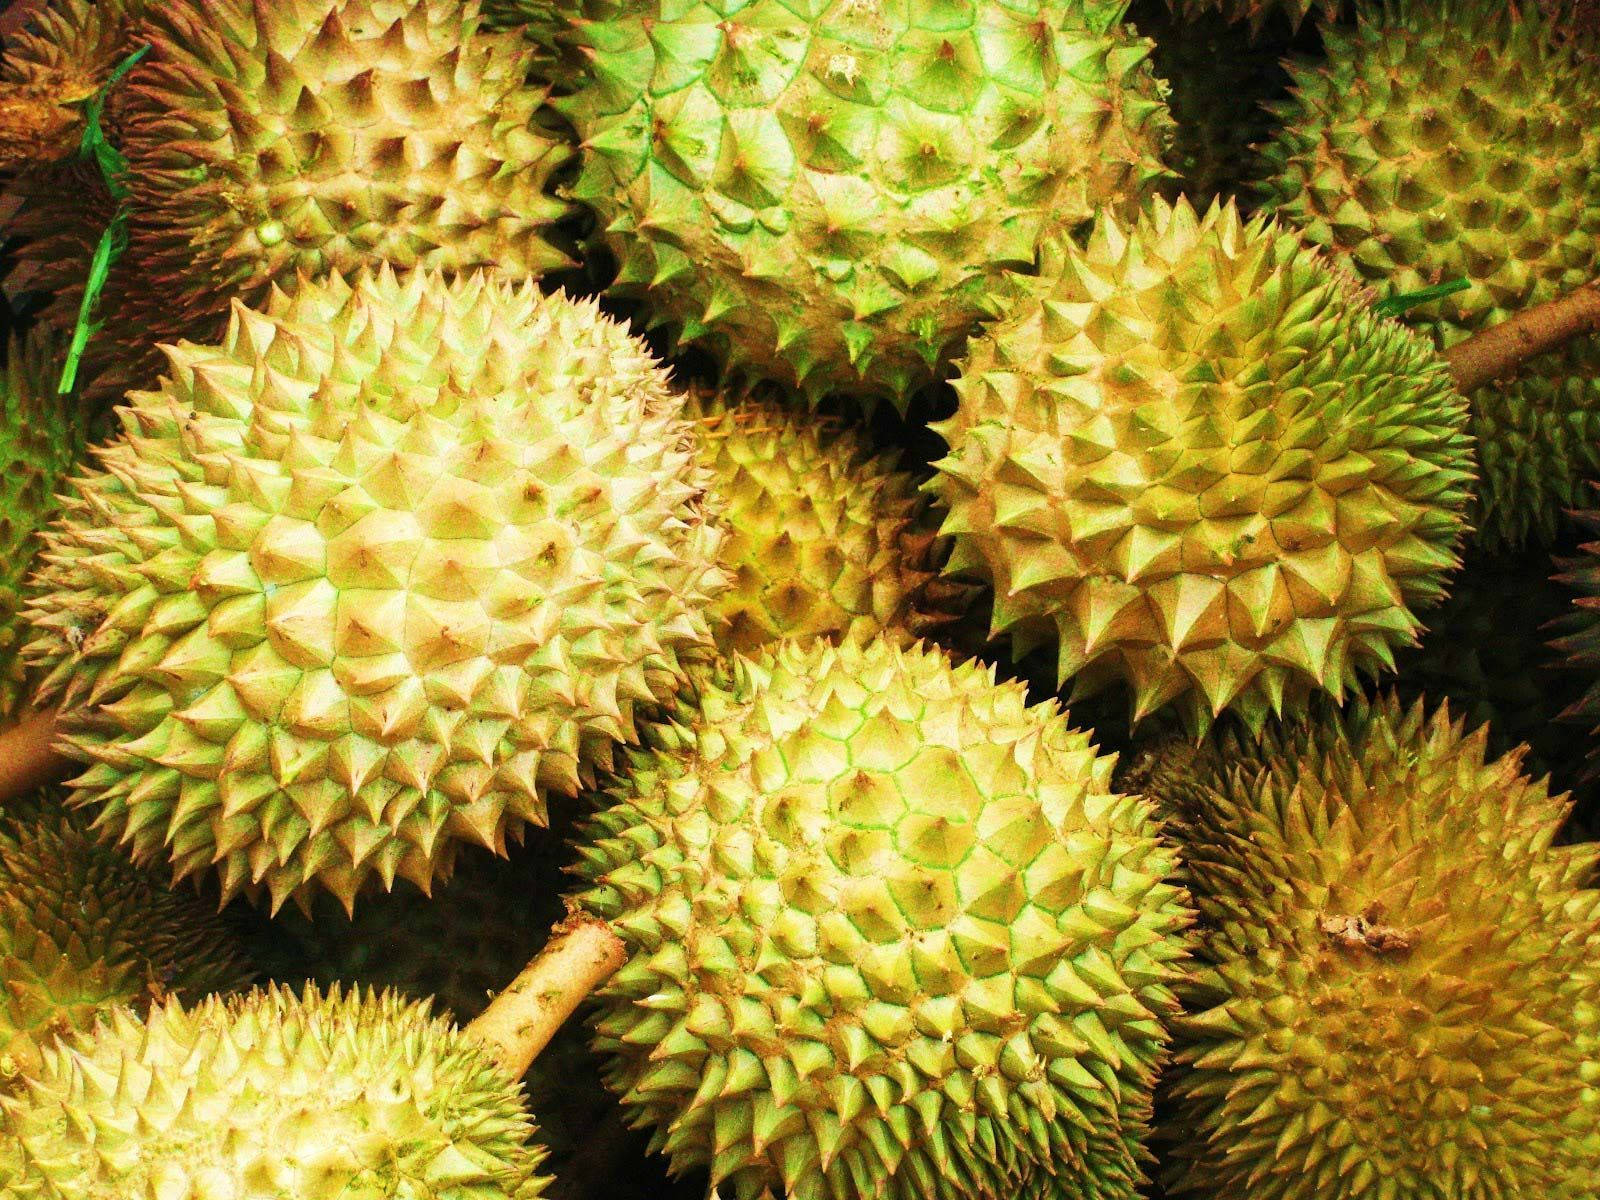 Pristine Harvested Durians Ready to Eat Wallpaper